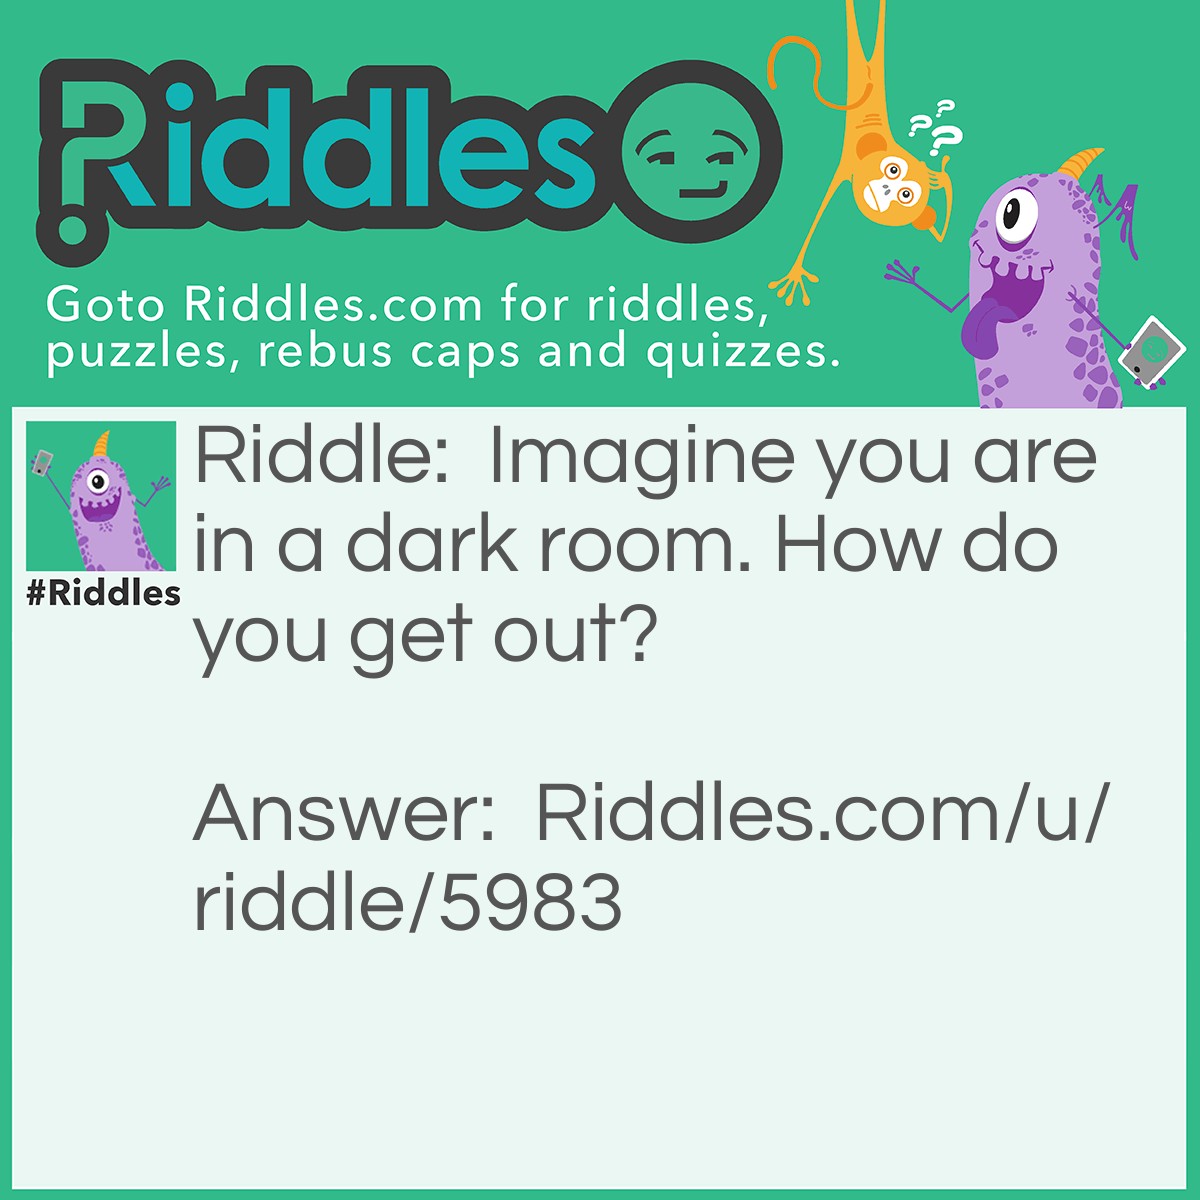 Riddle: Imagine you are in a dark room. How do you get out? Answer: Stop Imagining